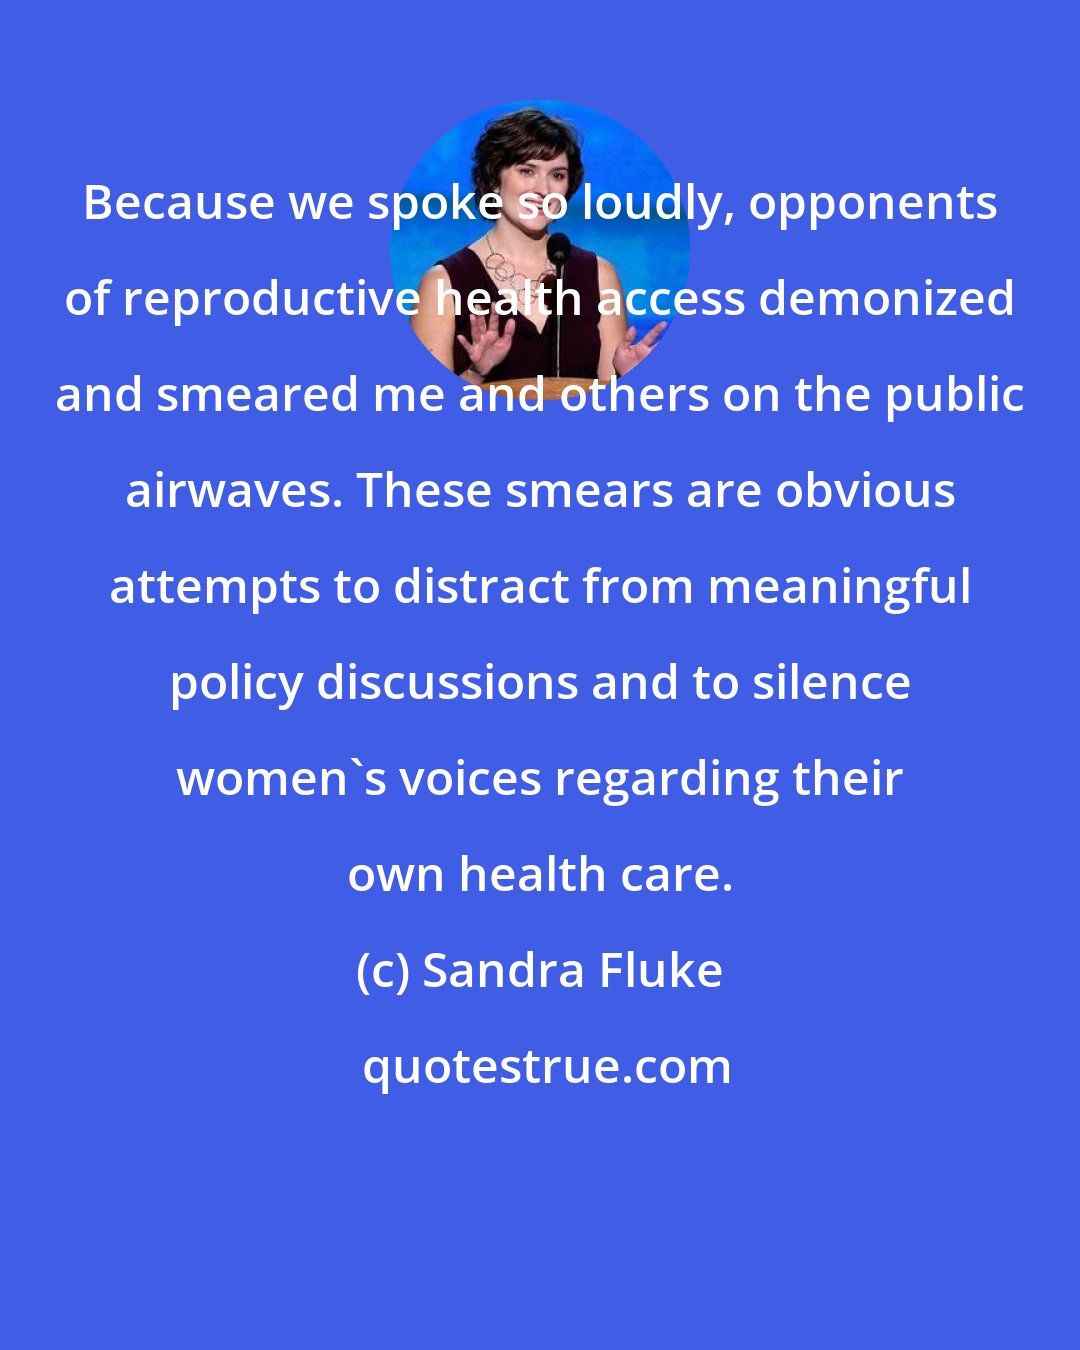 Sandra Fluke: Because we spoke so loudly, opponents of reproductive health access demonized and smeared me and others on the public airwaves. These smears are obvious attempts to distract from meaningful policy discussions and to silence women's voices regarding their own health care.